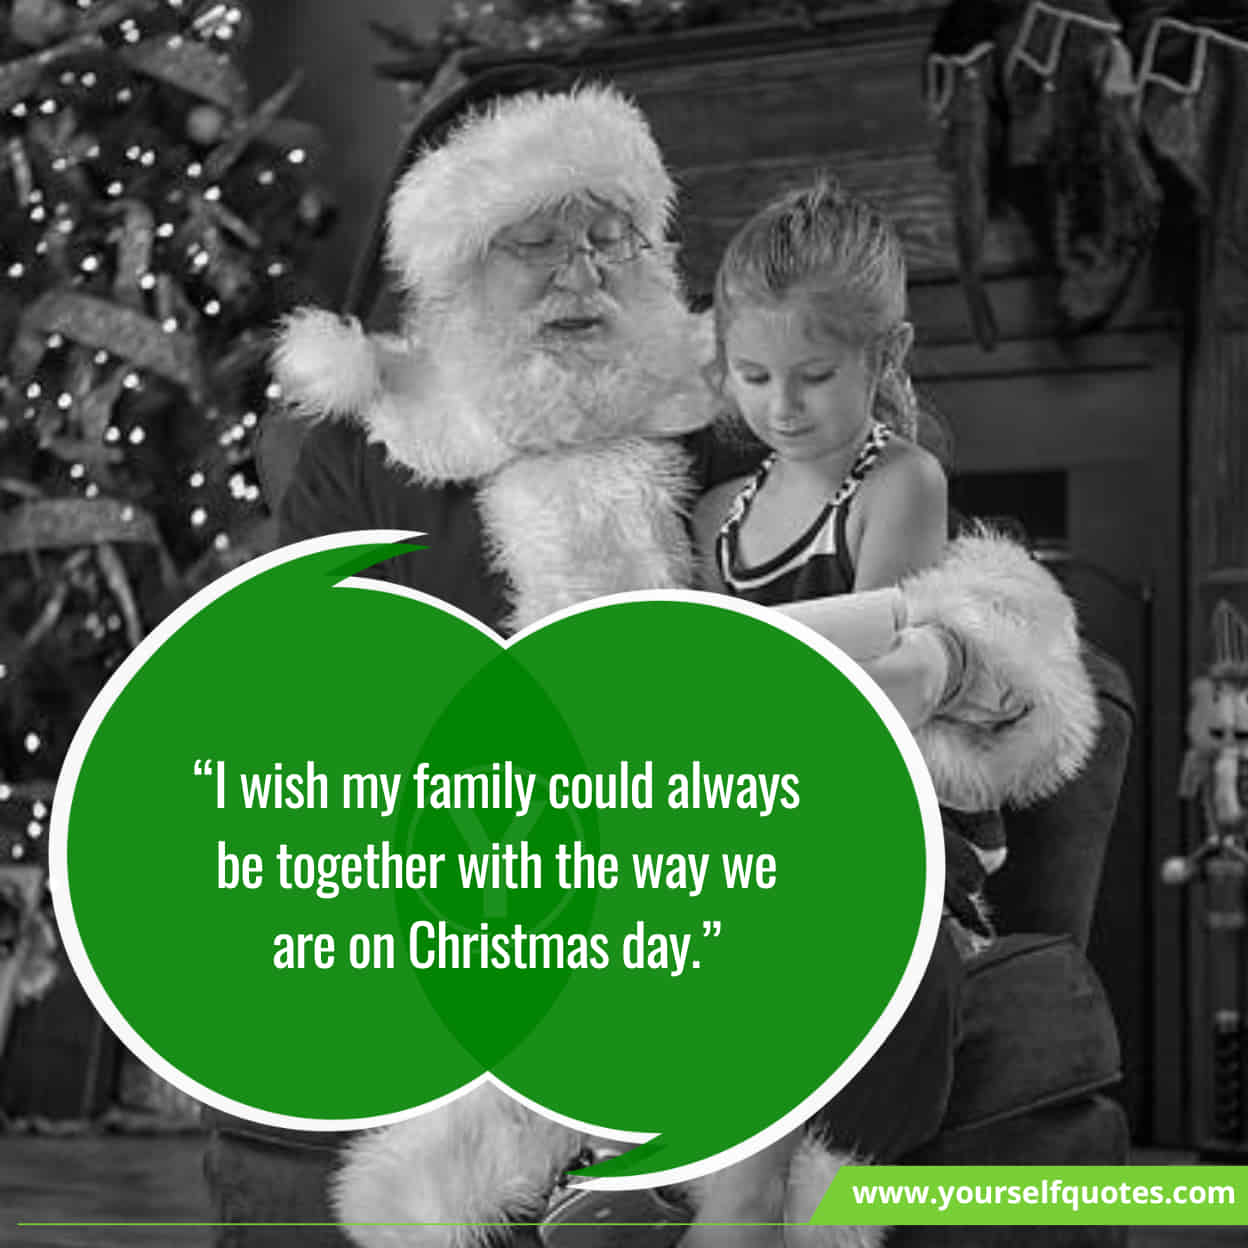 88 Merry Christmas Quotes 2022 For Family, Friends